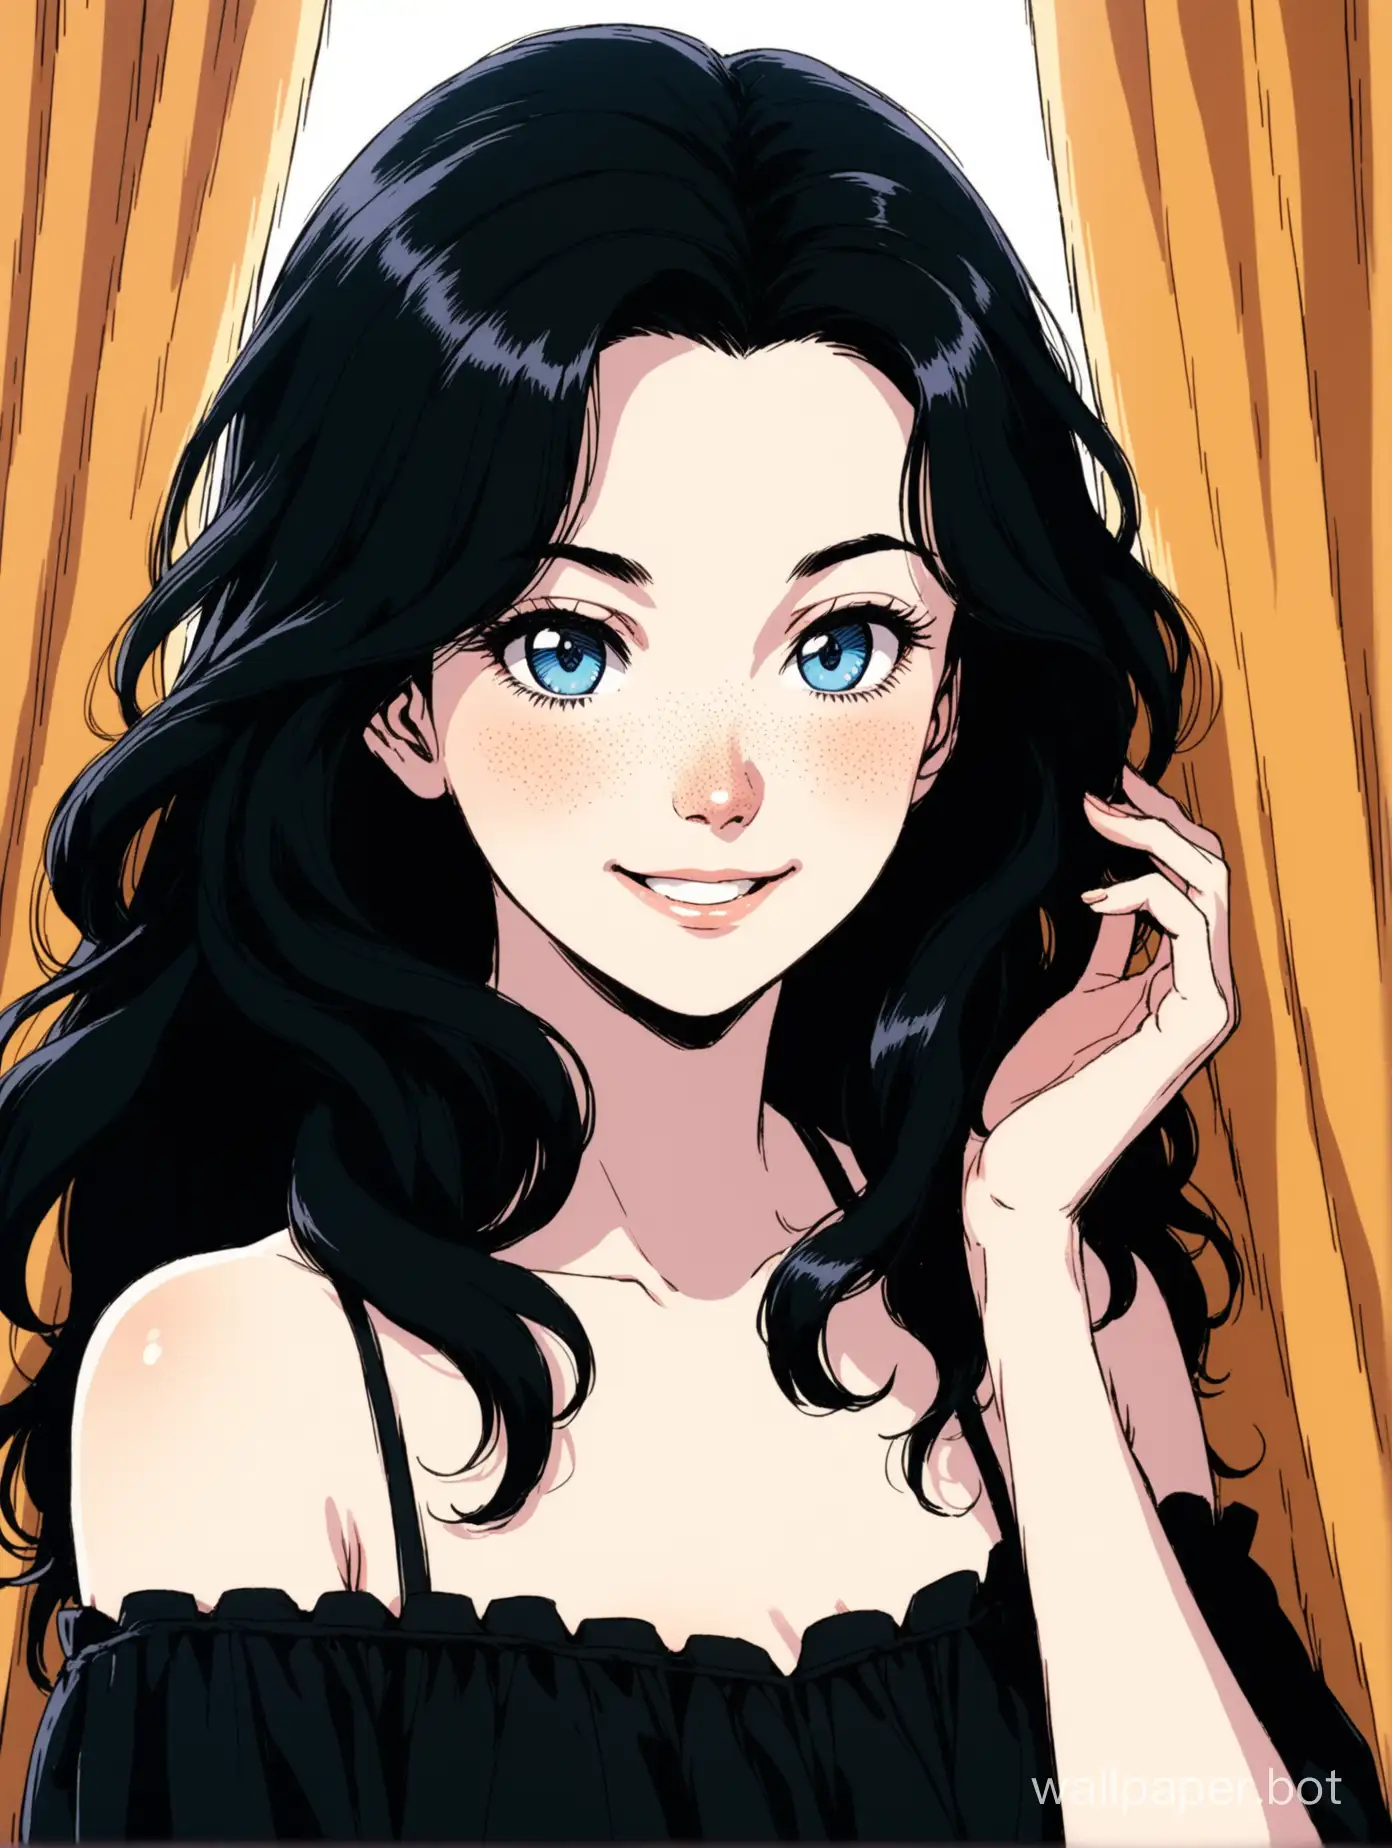 a beautiful 18 year old white woman, goth girl, she is pretty, she has blue eyes, she has pale skin, she has lots of freckles, she has long jet-black hair that is wavy and parted in the middle and falls in curtains, smiling, beaming, mature face, perfect, sense of wonder, retro 1980s anime